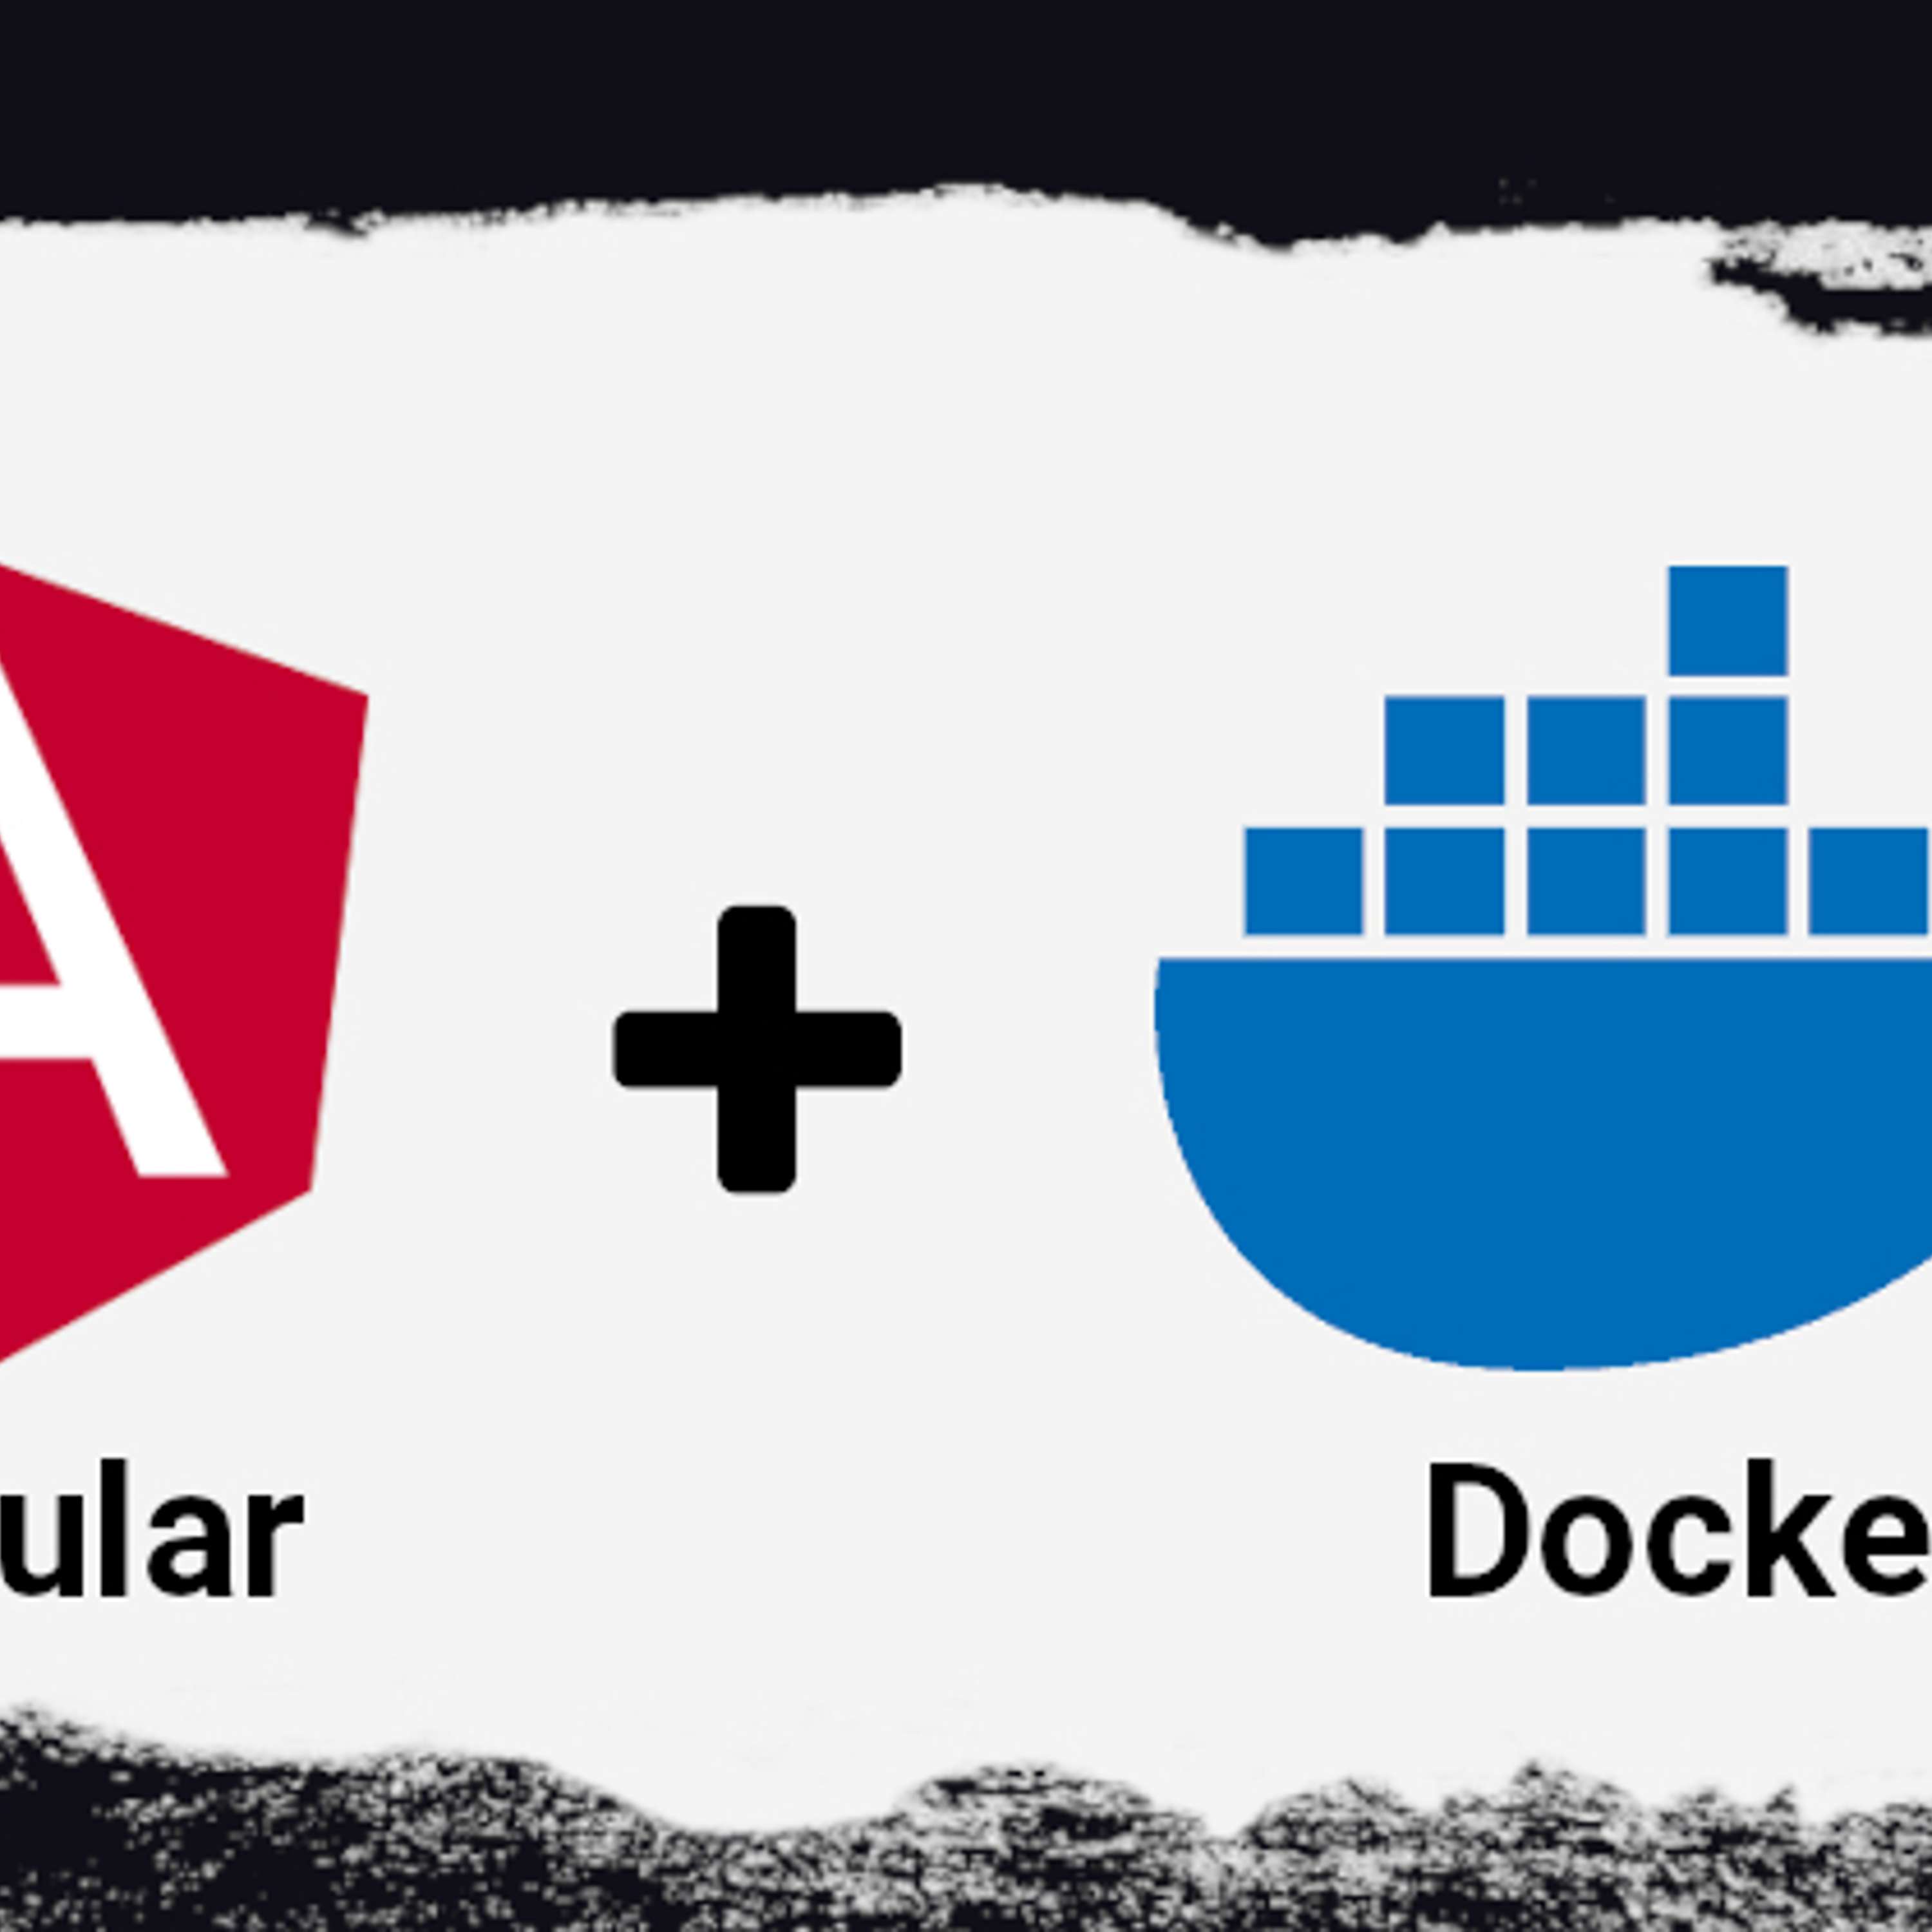 Creating and Running an Angular Application in a Docker Container